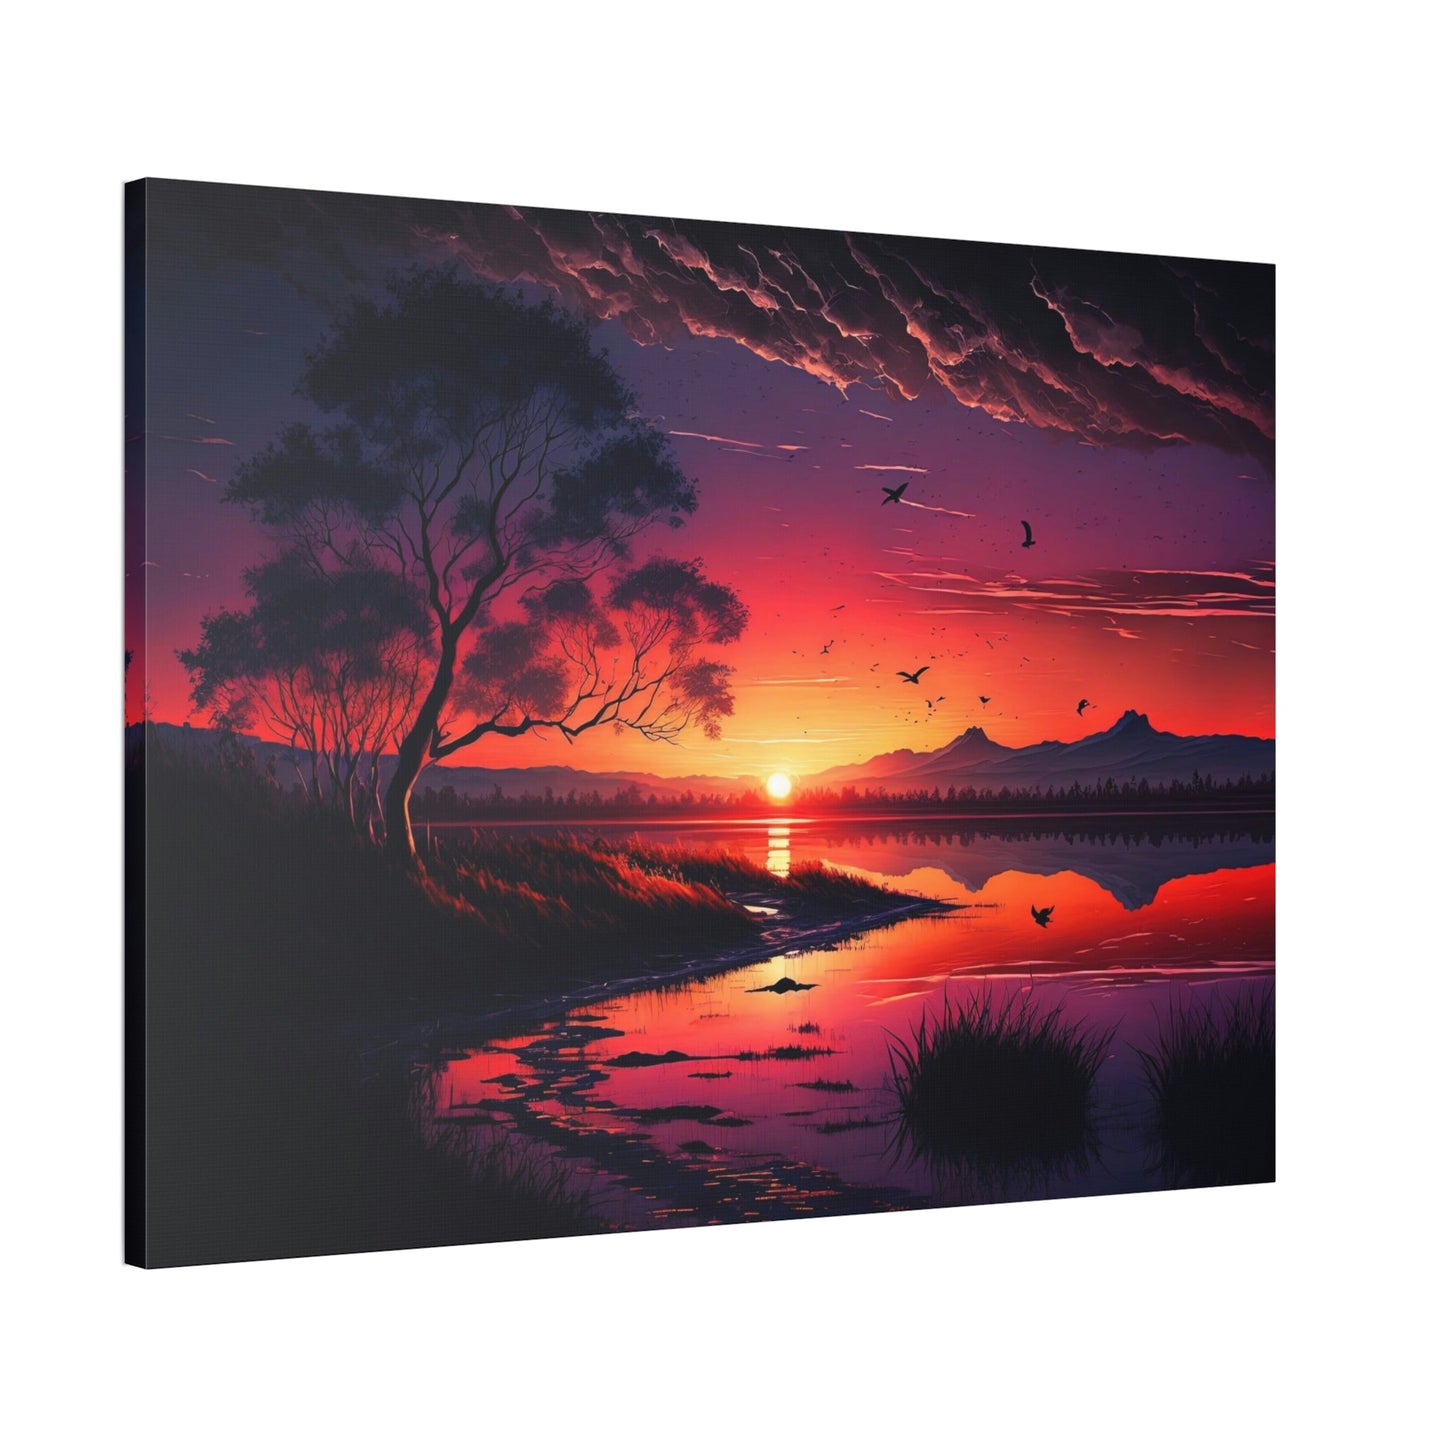 River's Edge: Natural Canvas Wall Art of a Picturesque Riverbank